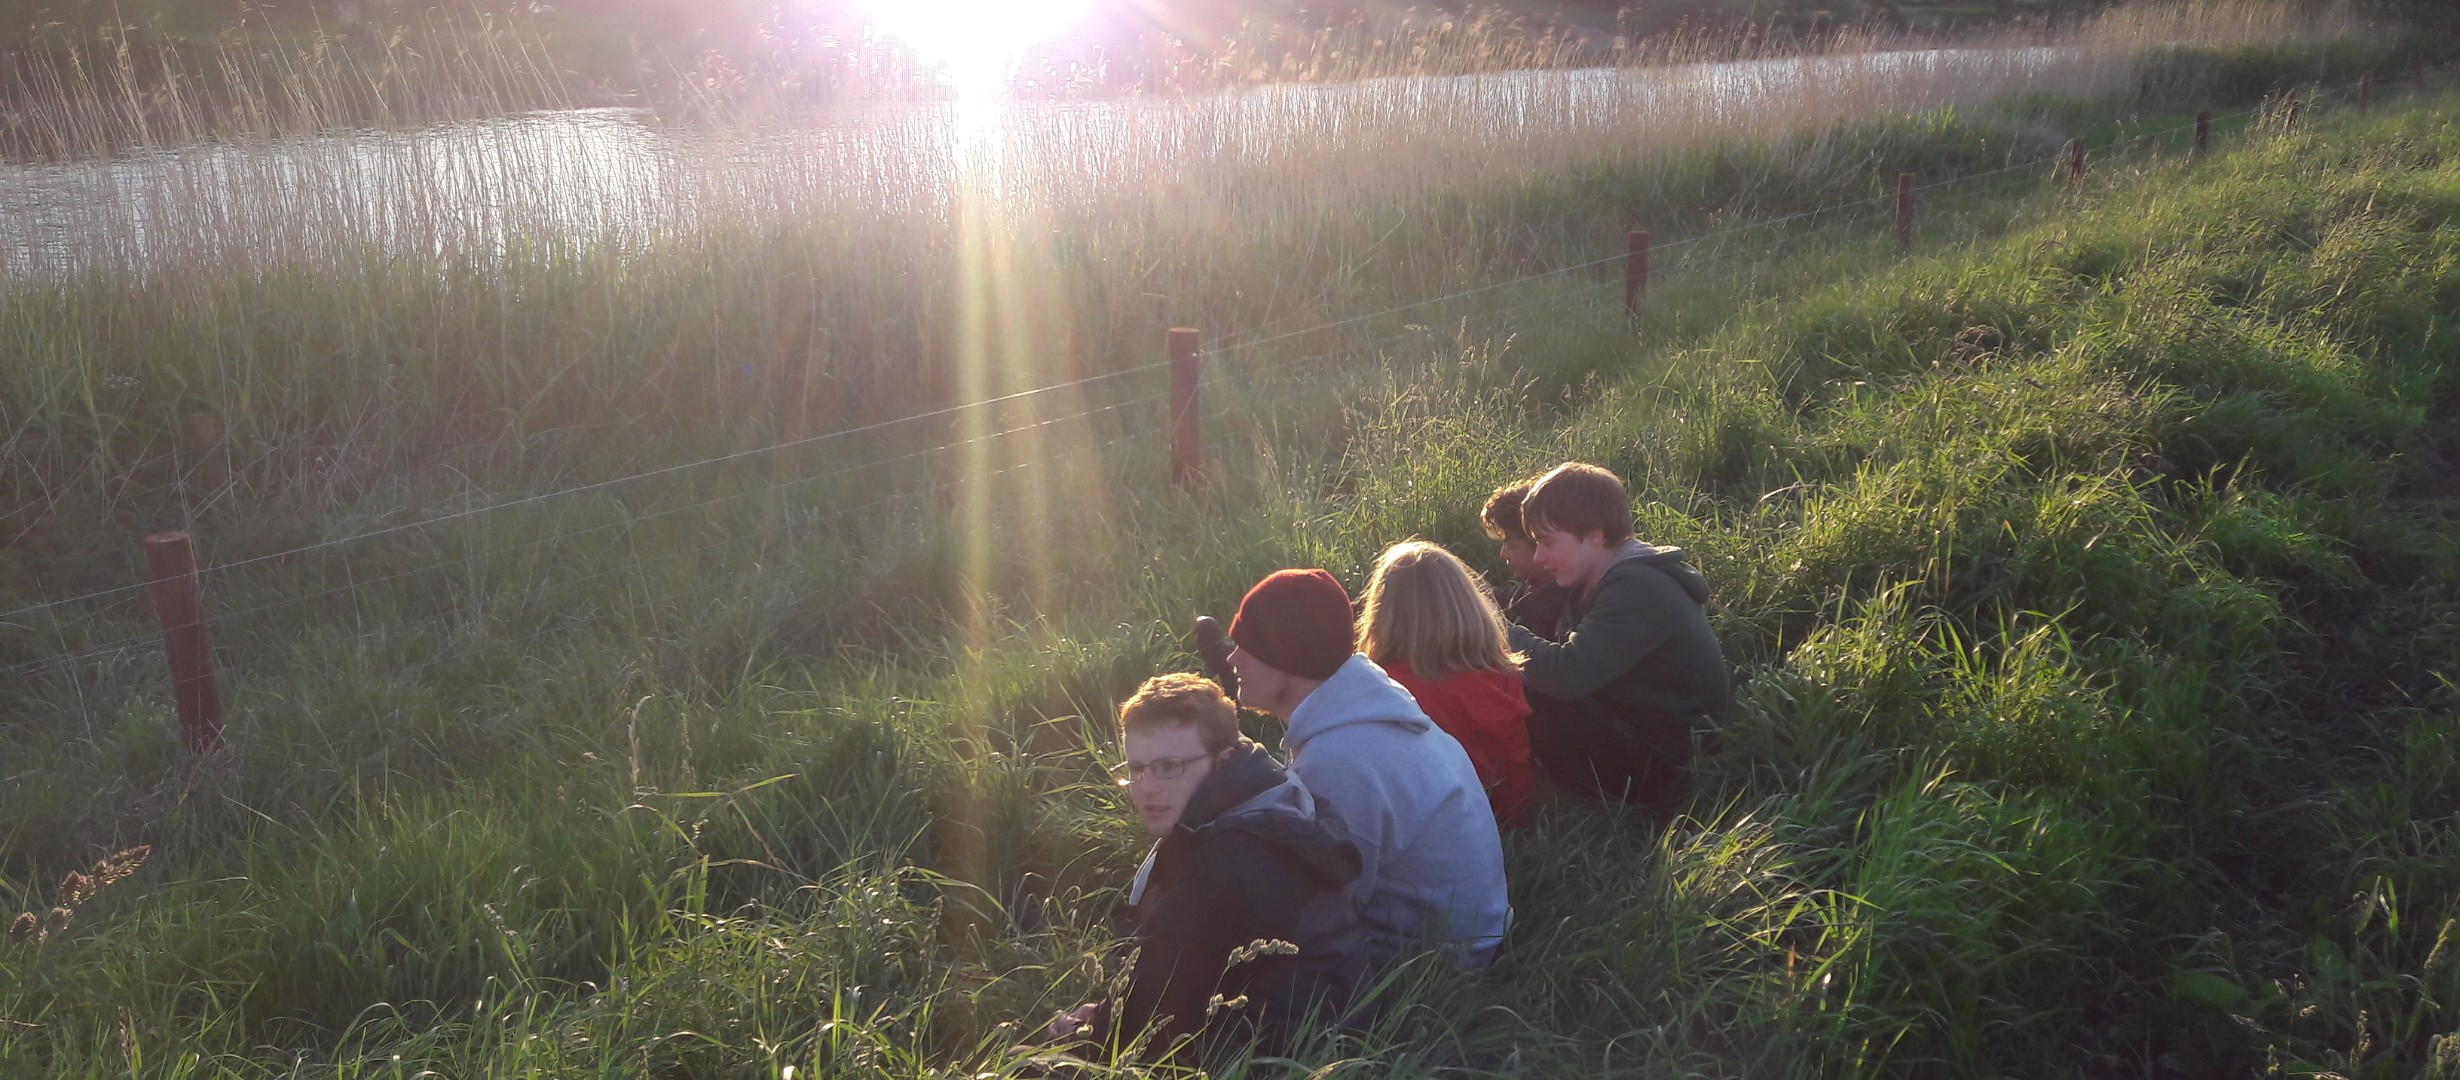 Four young people sat in a line together on ,long grass in the foreground, overlooking a river reflecting a low sun in the background